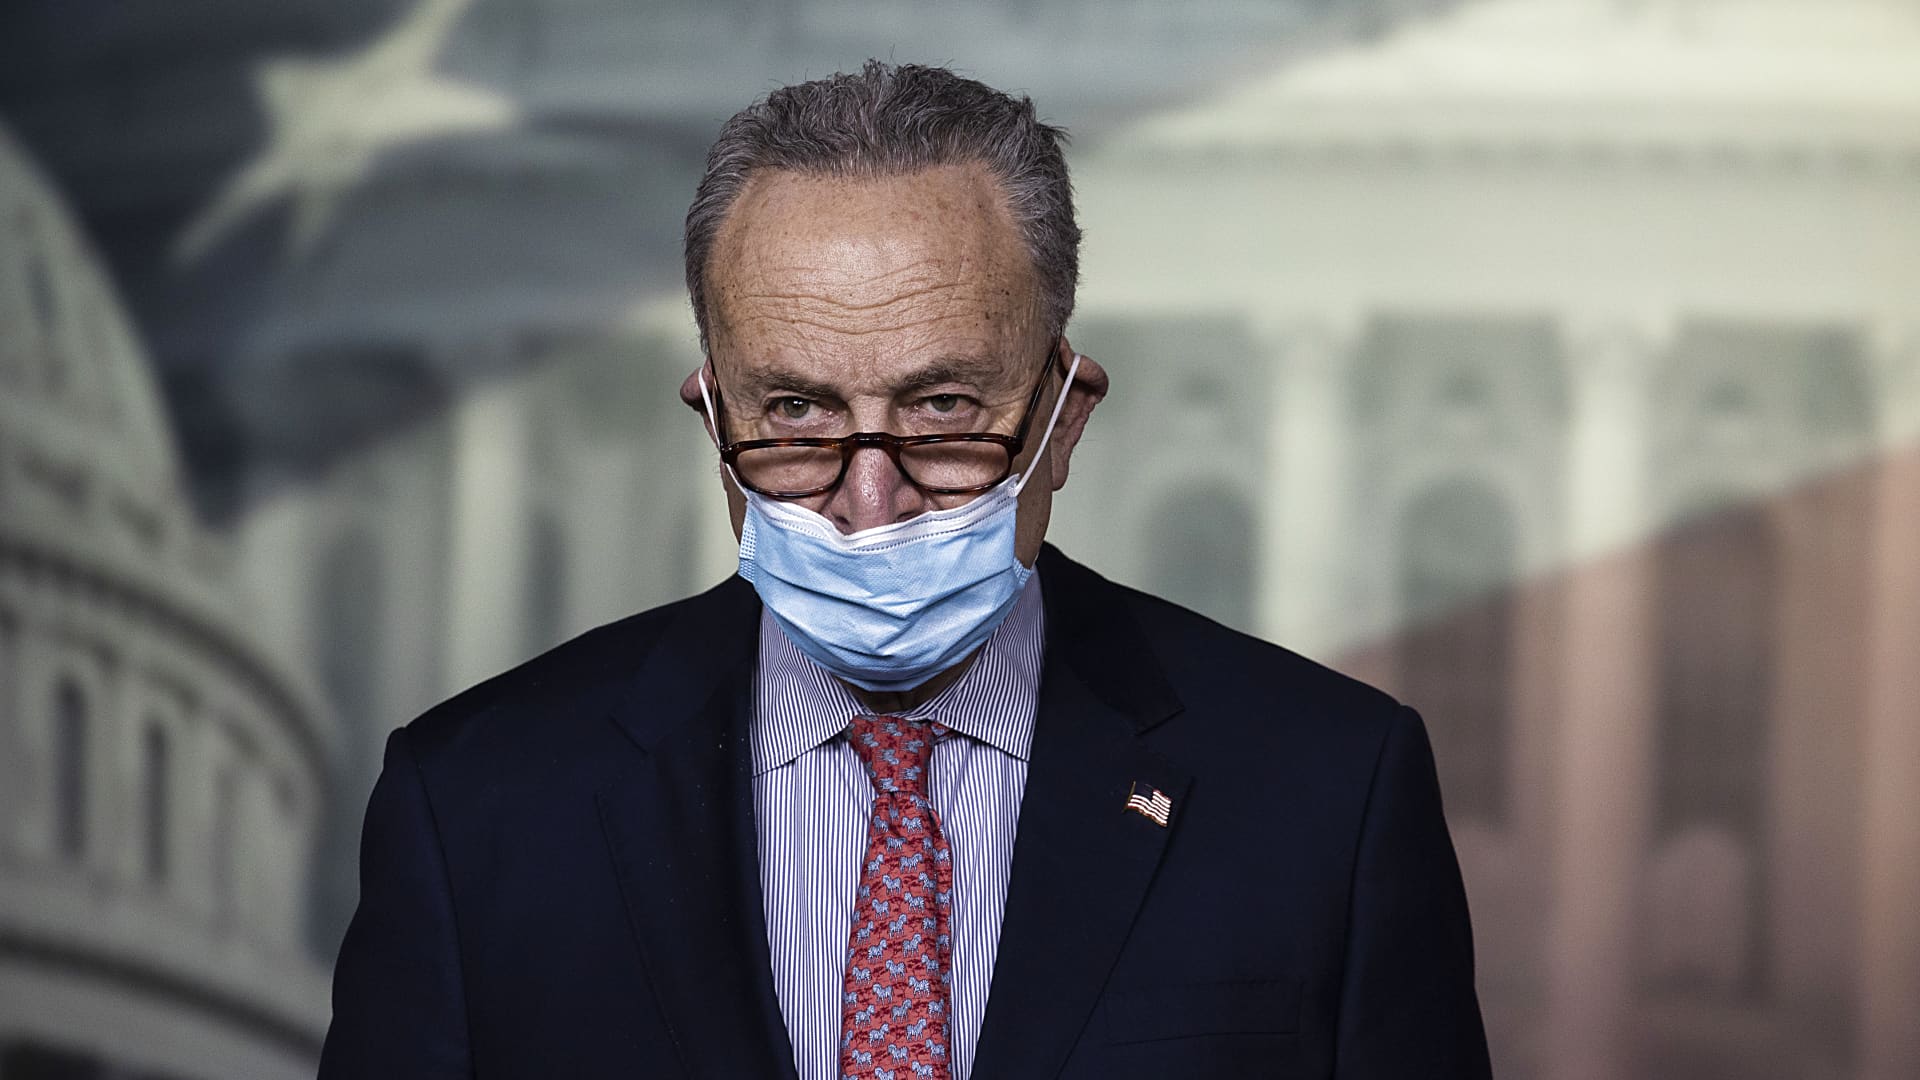 Senate Minority Leader Chuck Schumer (D-NY) speaks at a press conference on Capitol Hill on December 20, 2020 in Washington, DC. Republicans and Democrats in the Senate finally came to an agreement on the coronavirus relief bill and a vote is expected on Monday.